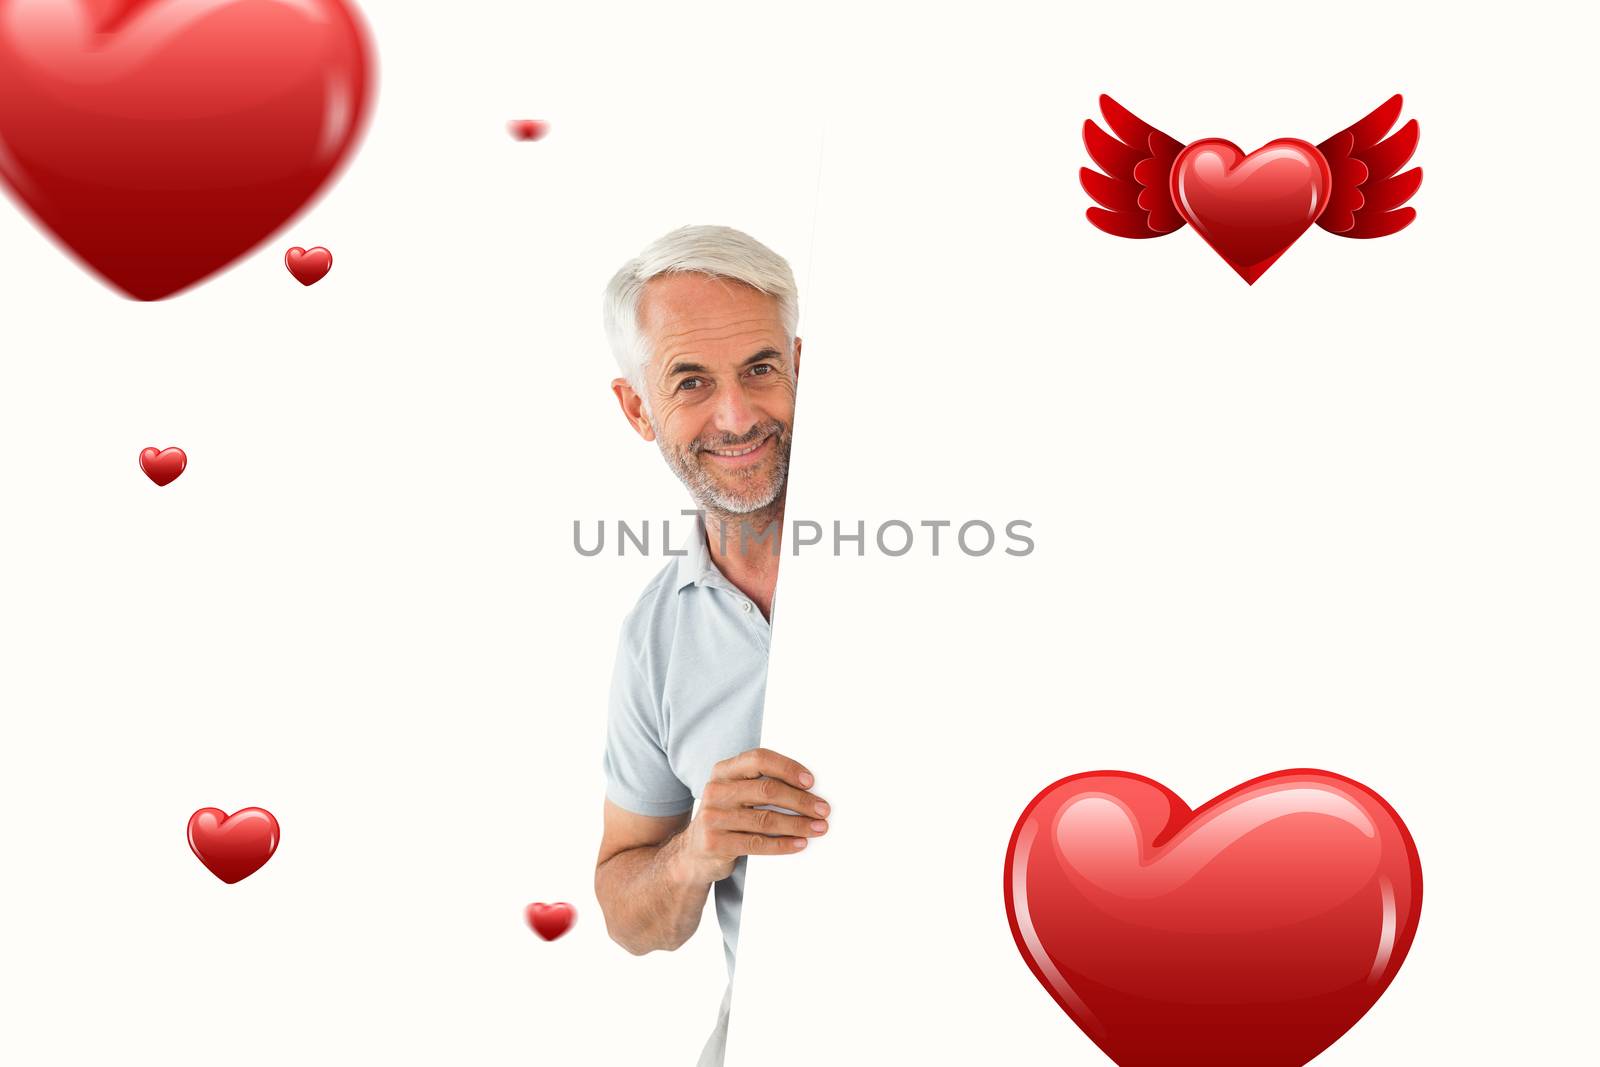 Smiling man showing large poster against hearts